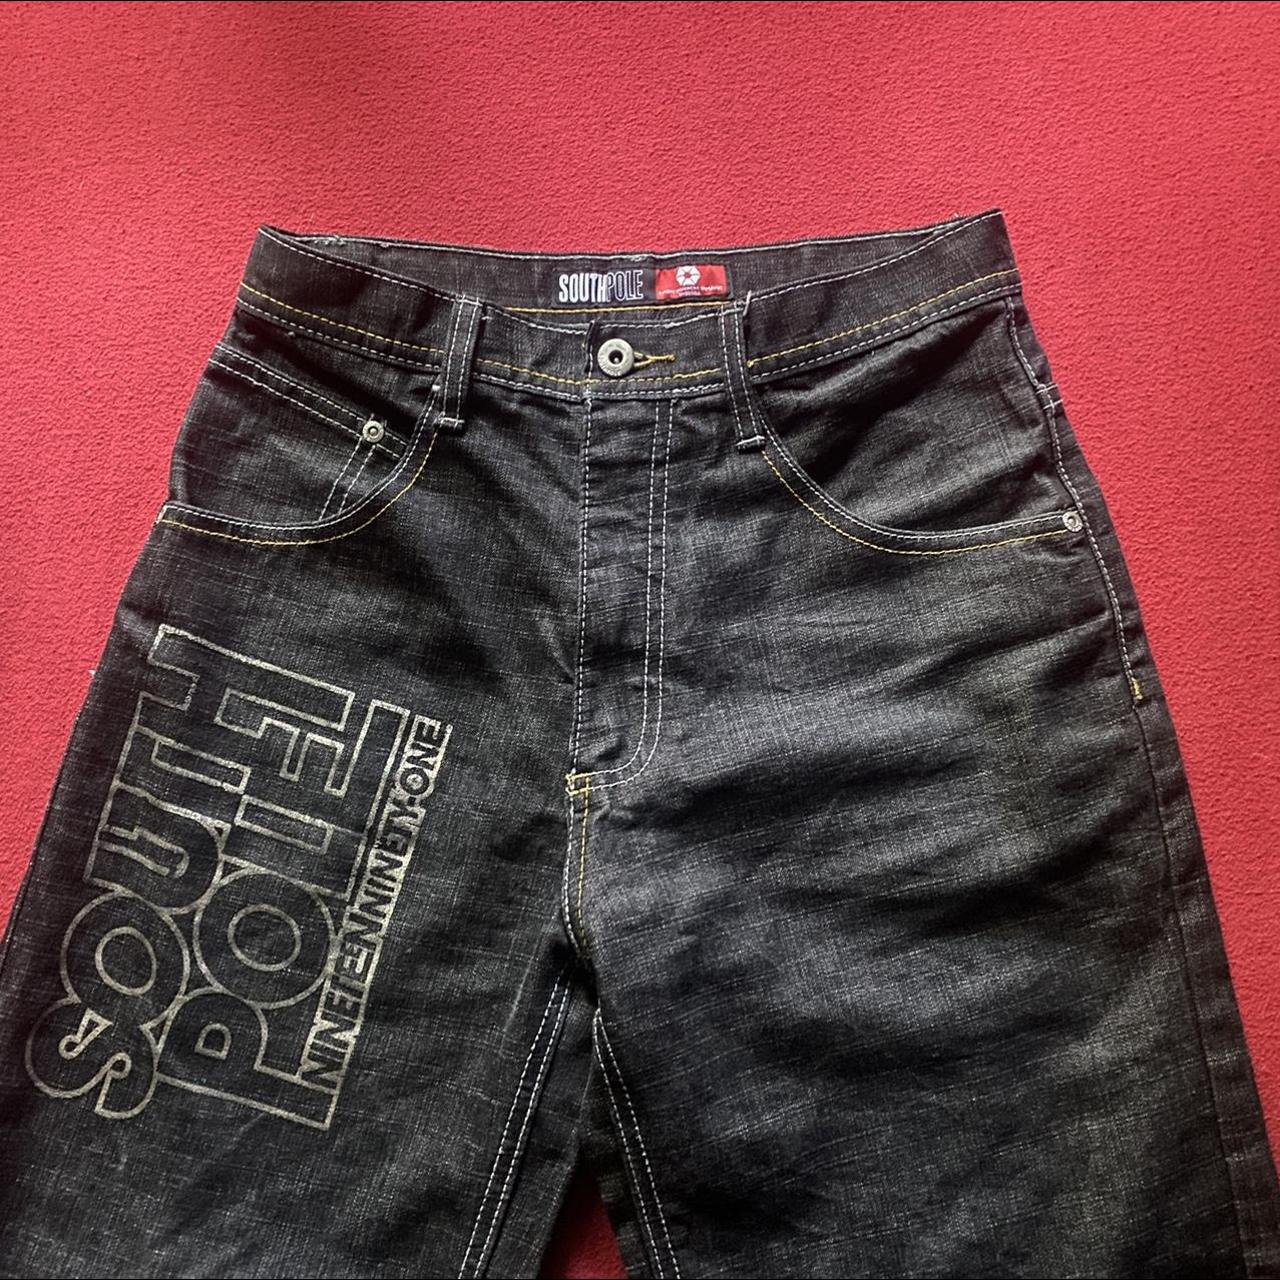 SouthPole gray jeans - size 14 in boys (about 37.5... - Depop